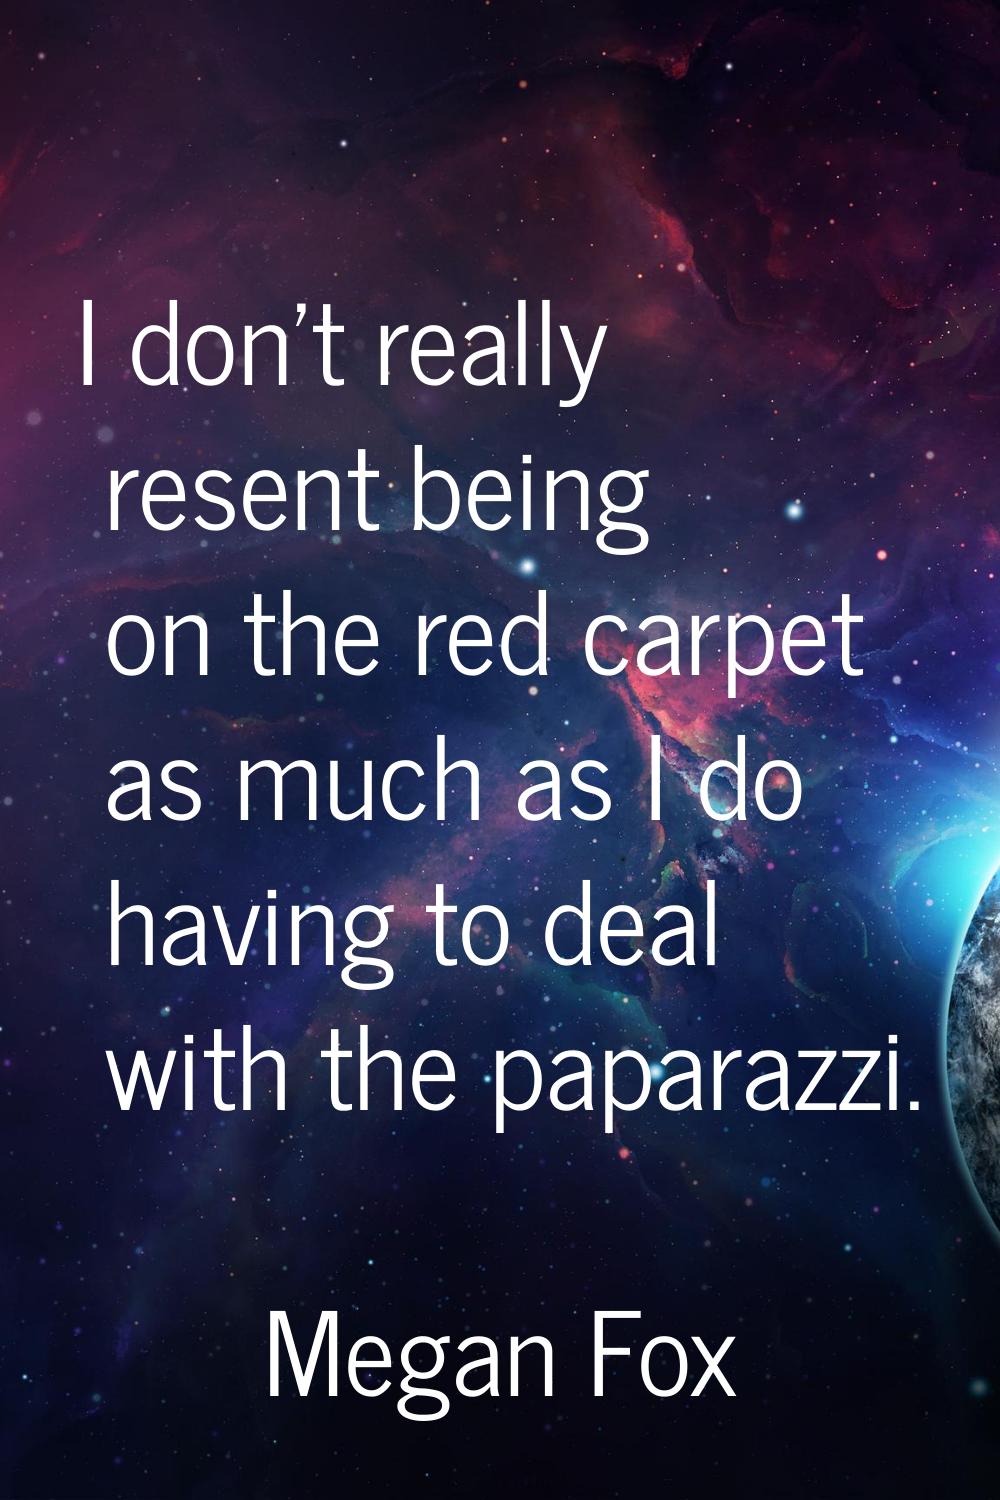 I don't really resent being on the red carpet as much as I do having to deal with the paparazzi.